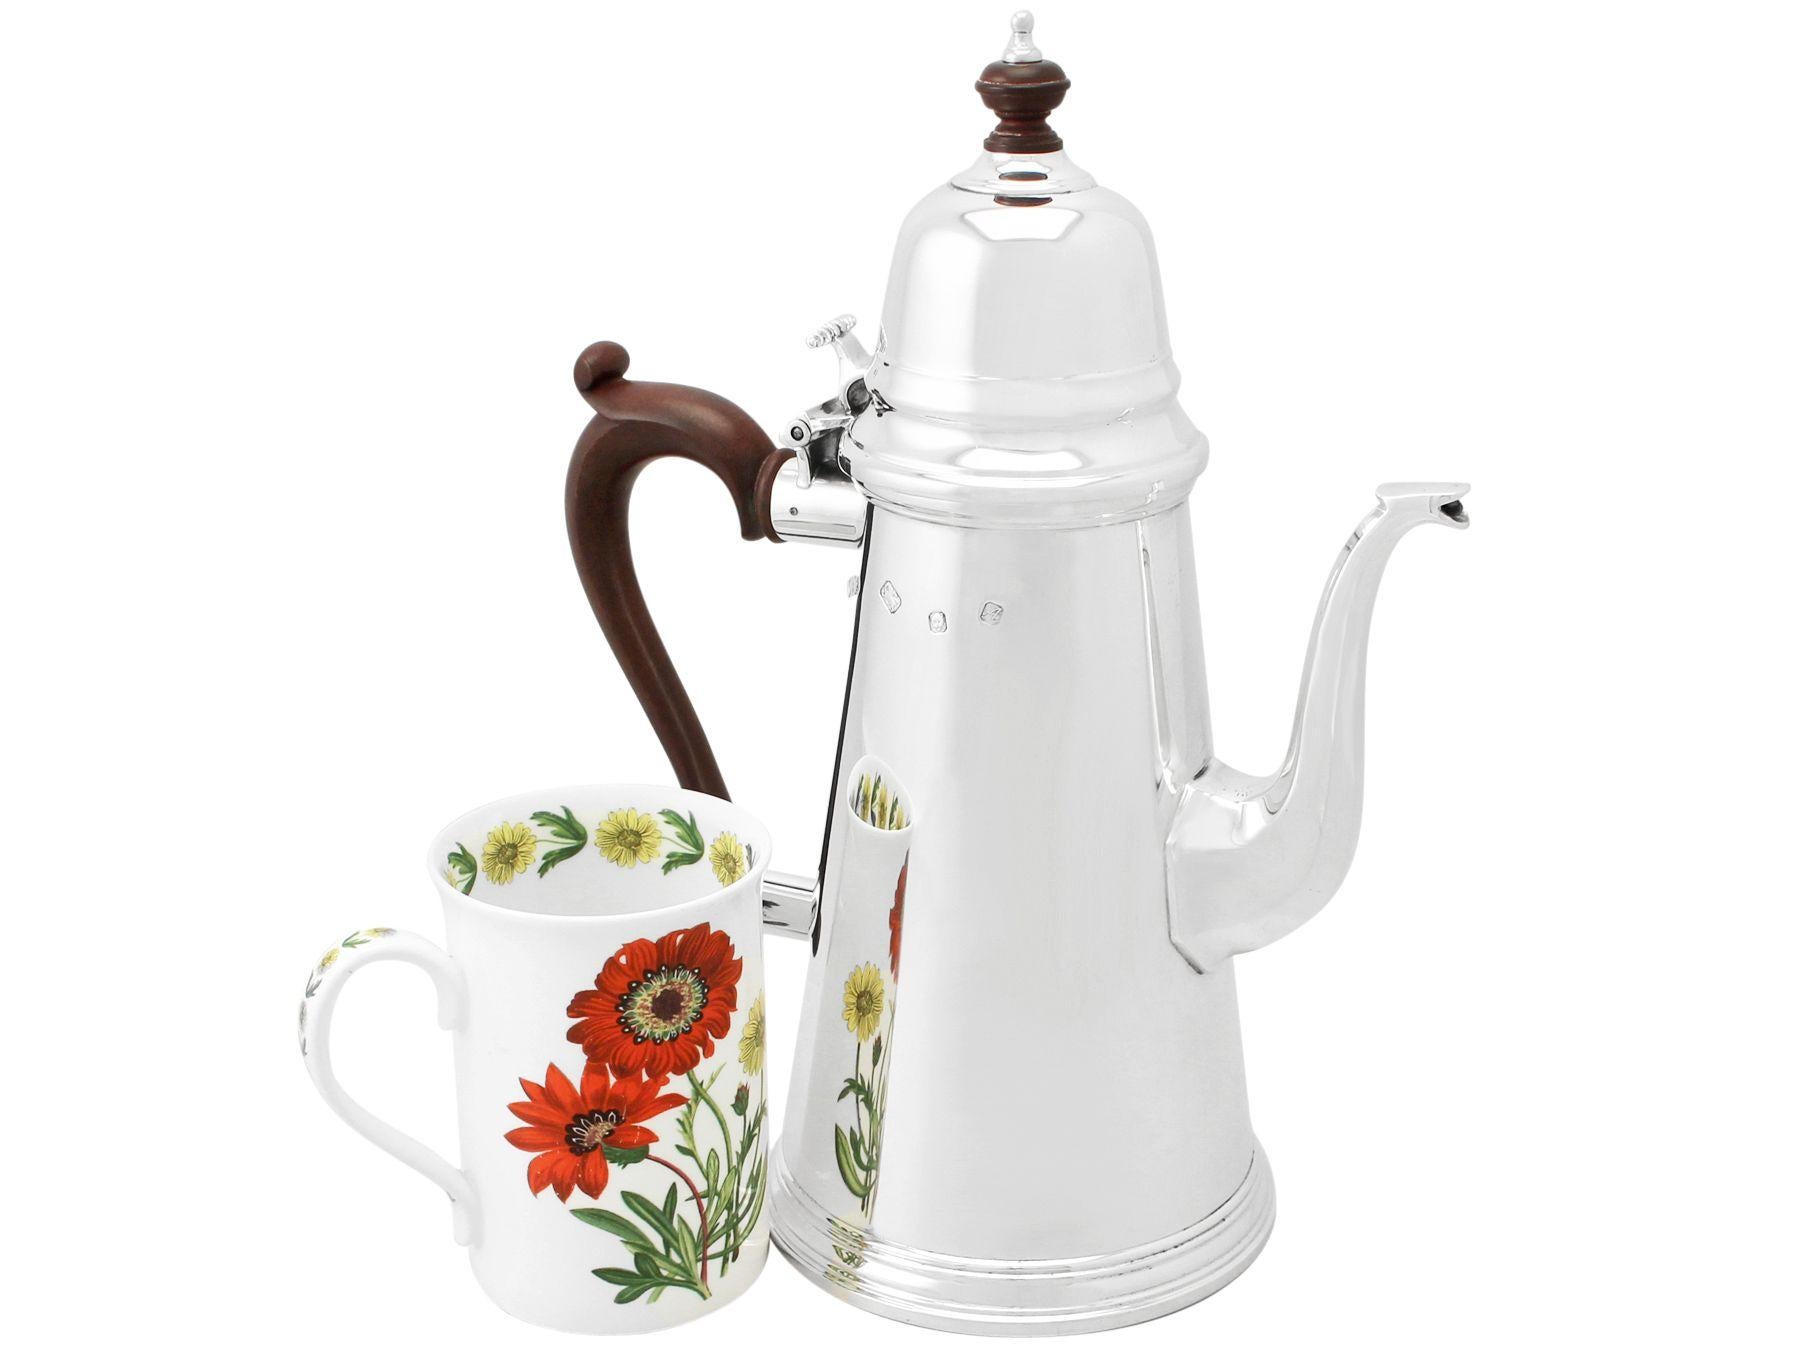 A fine and impressive vintage Elizabeth II English sterling silver coffee pot crafted by Reid & Sons Ltd, in the George I style; an addition to our collectable teaware collection

This fine vintage Elizabeth II sterling silver coffee pot has a